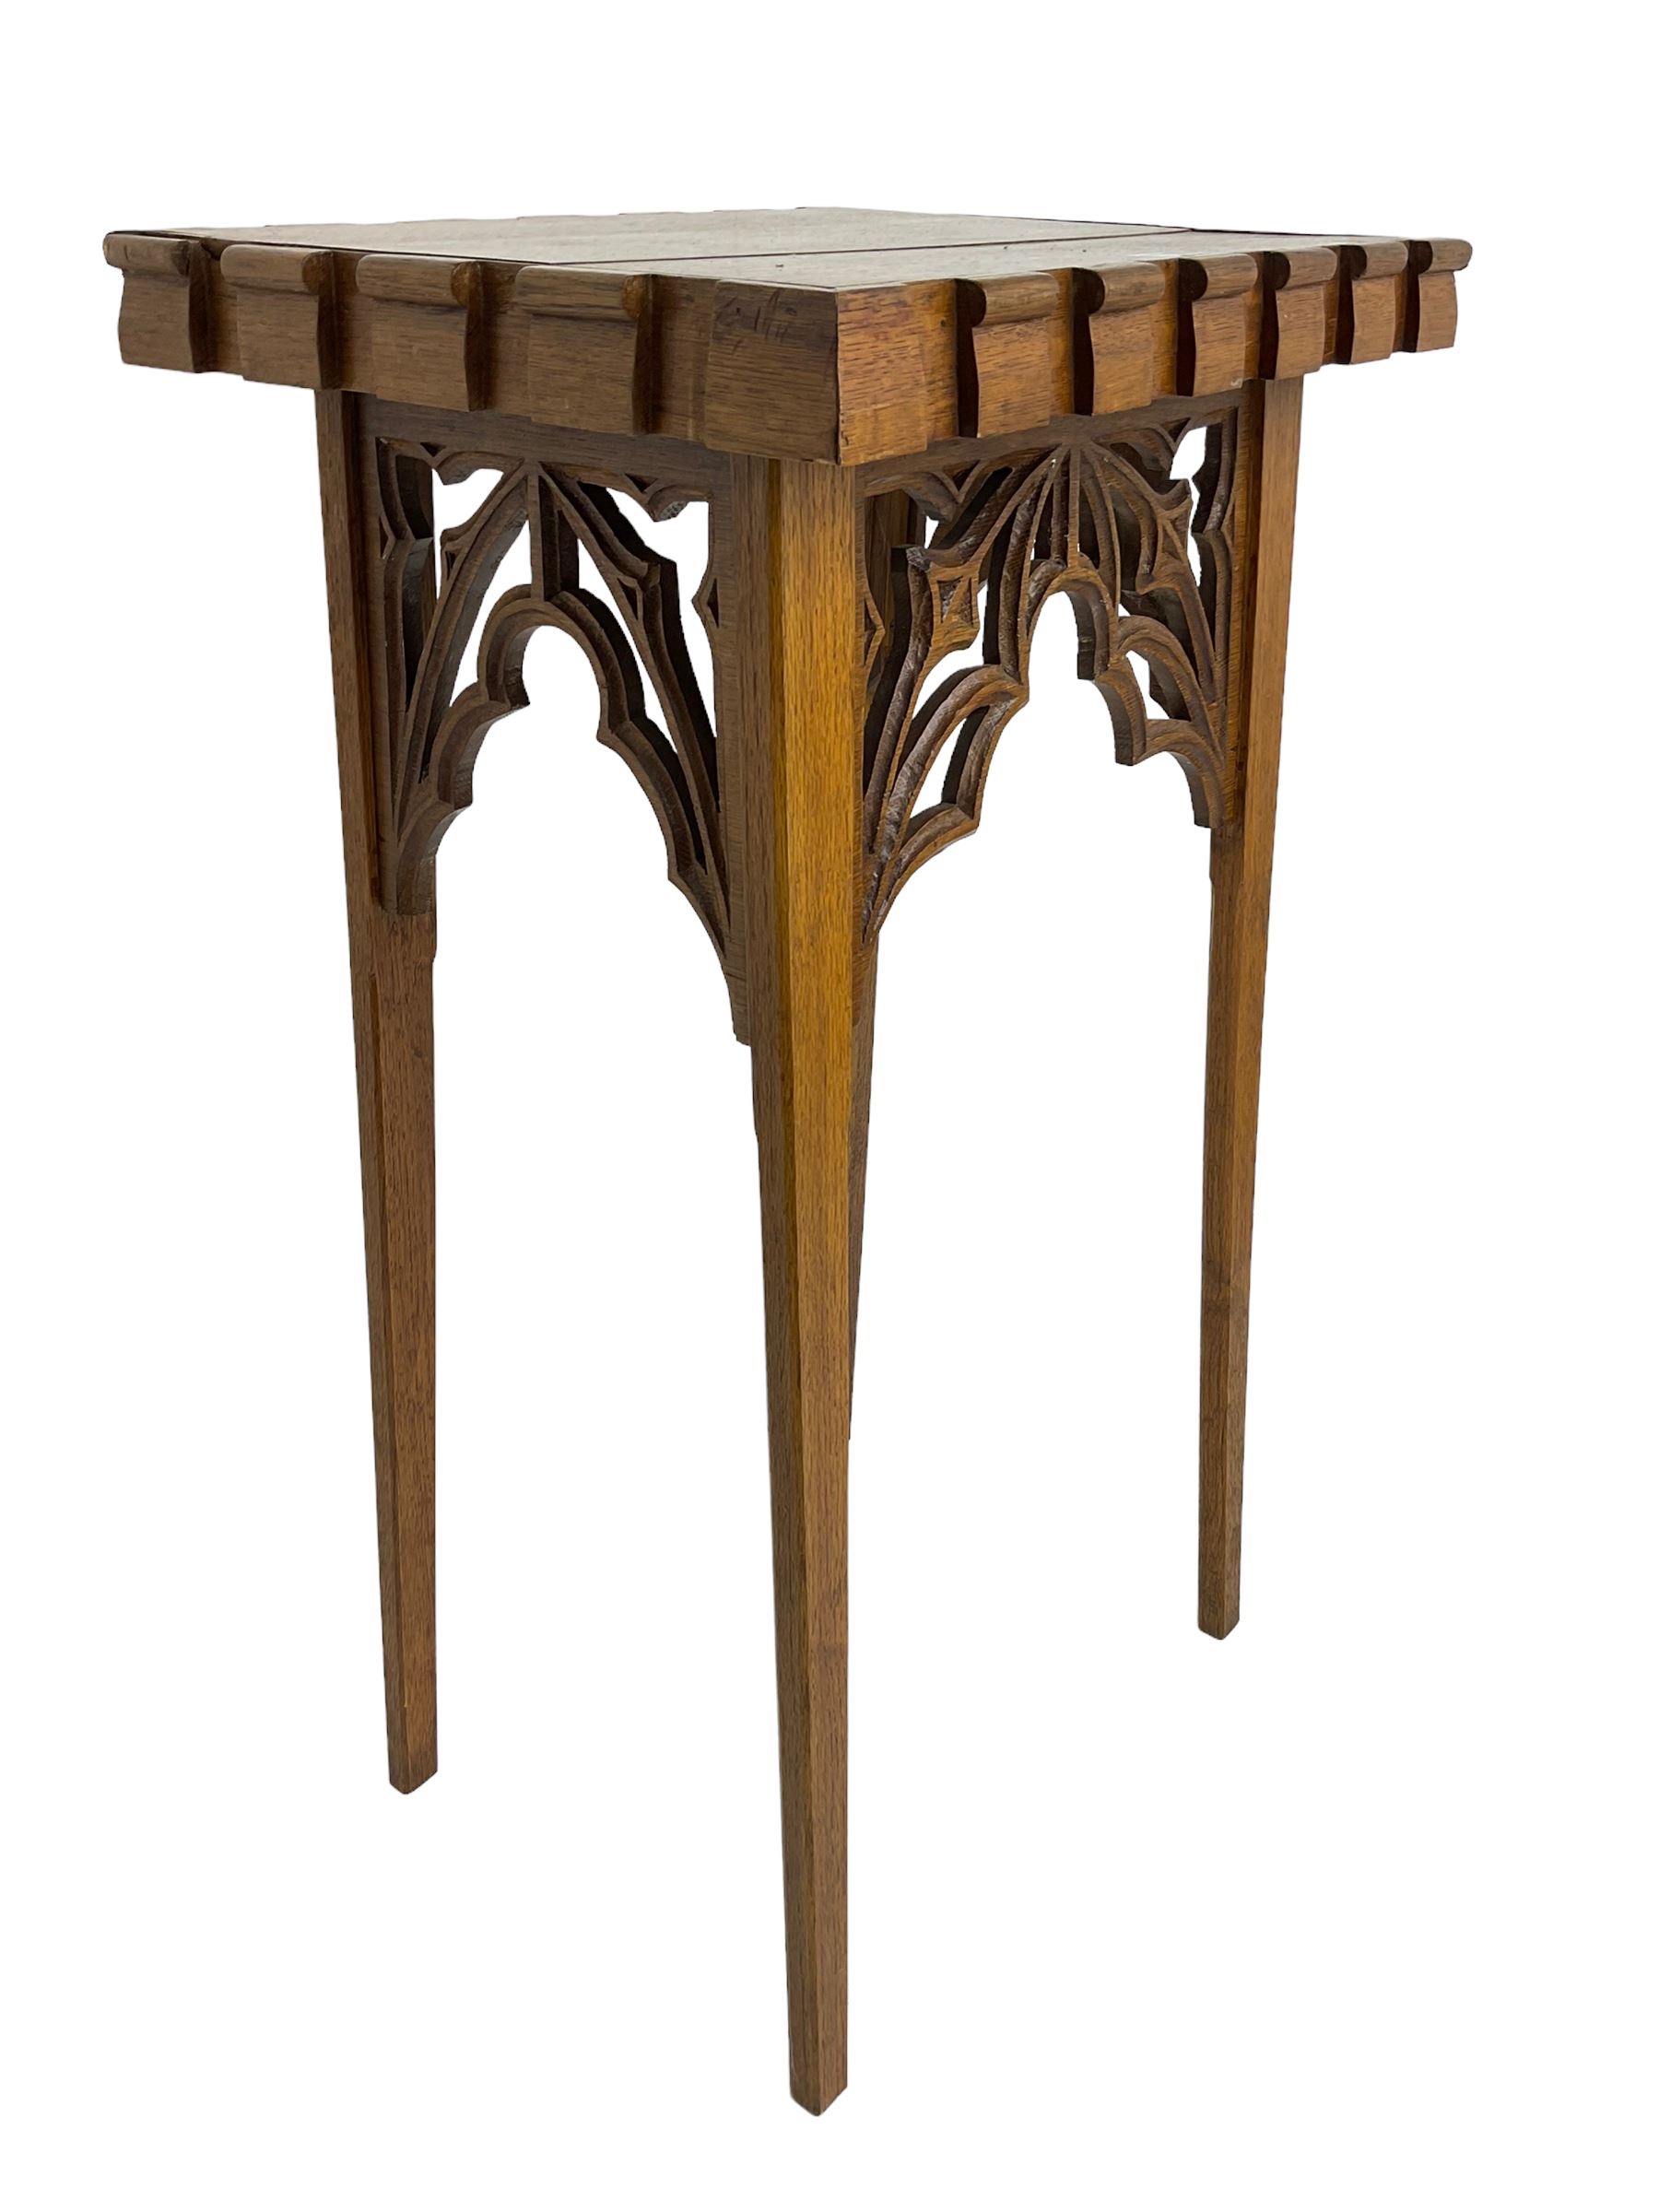 20th century ecclesiastical Gothic style oak stand - Image 4 of 6